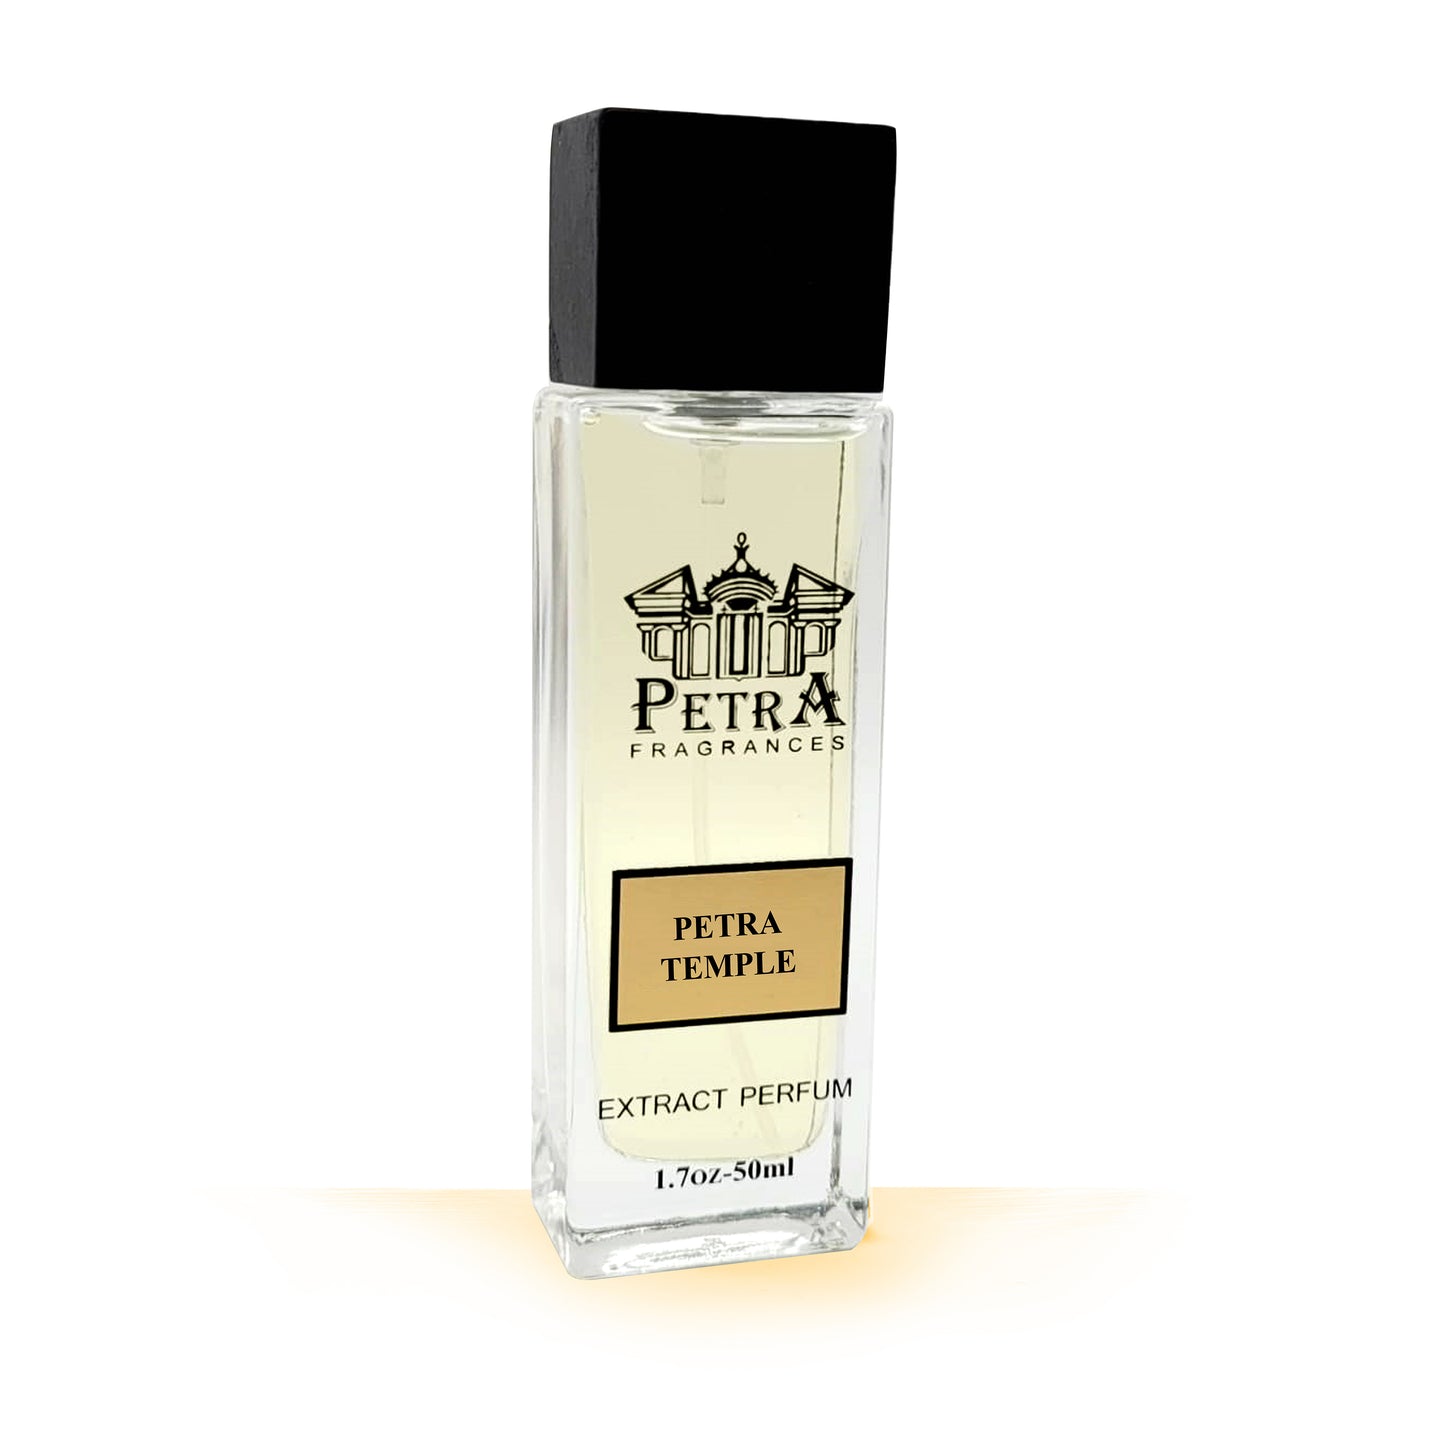 PETRA TEMPLE | Inspired by Oud’S Wood by Tom’s Ford’s.